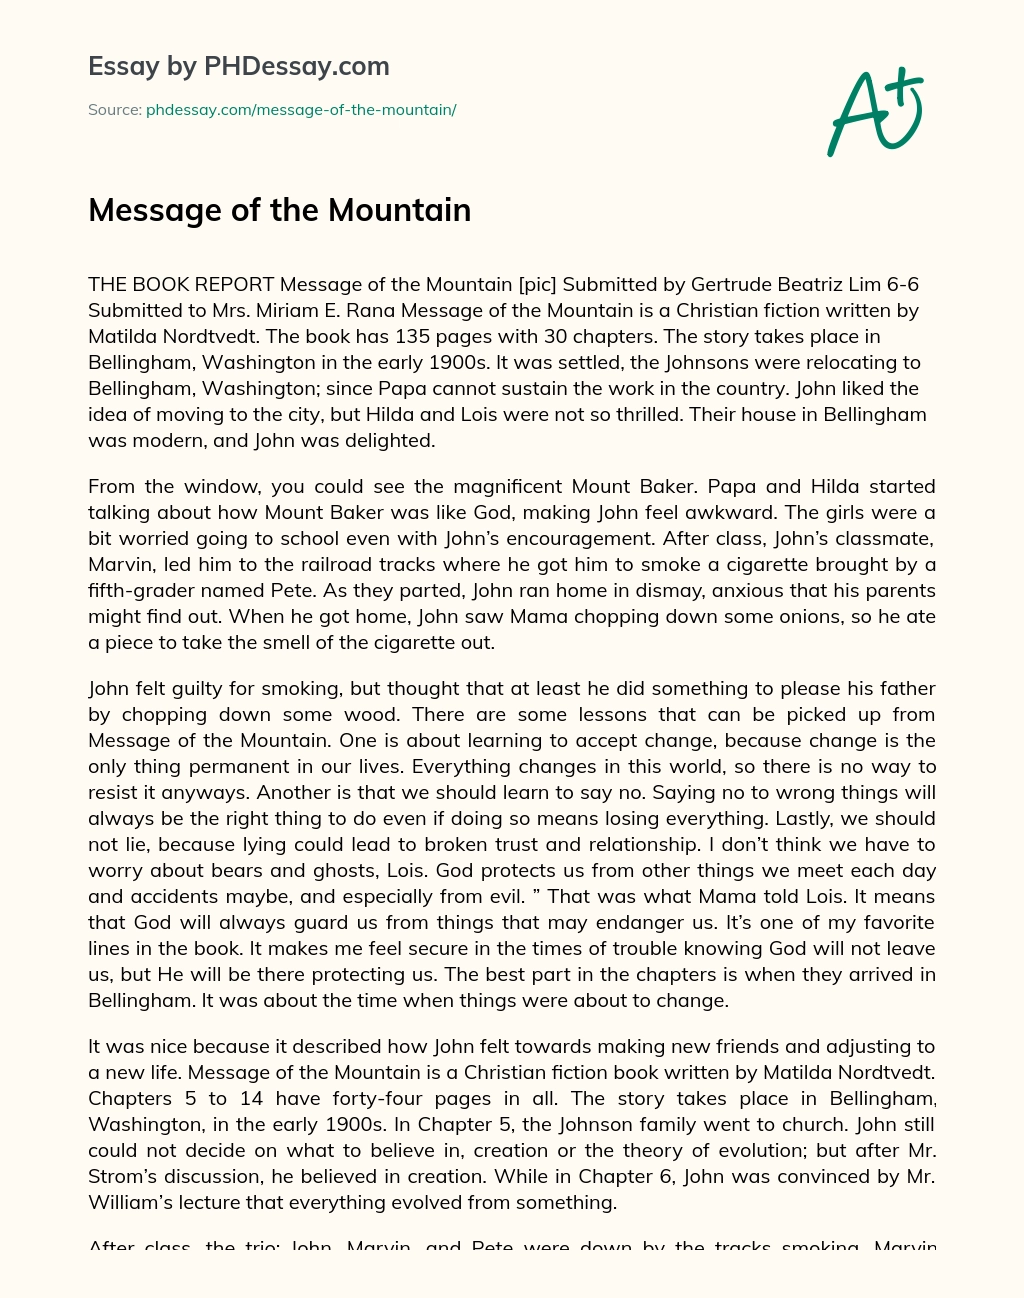 Message of the Mountain essay